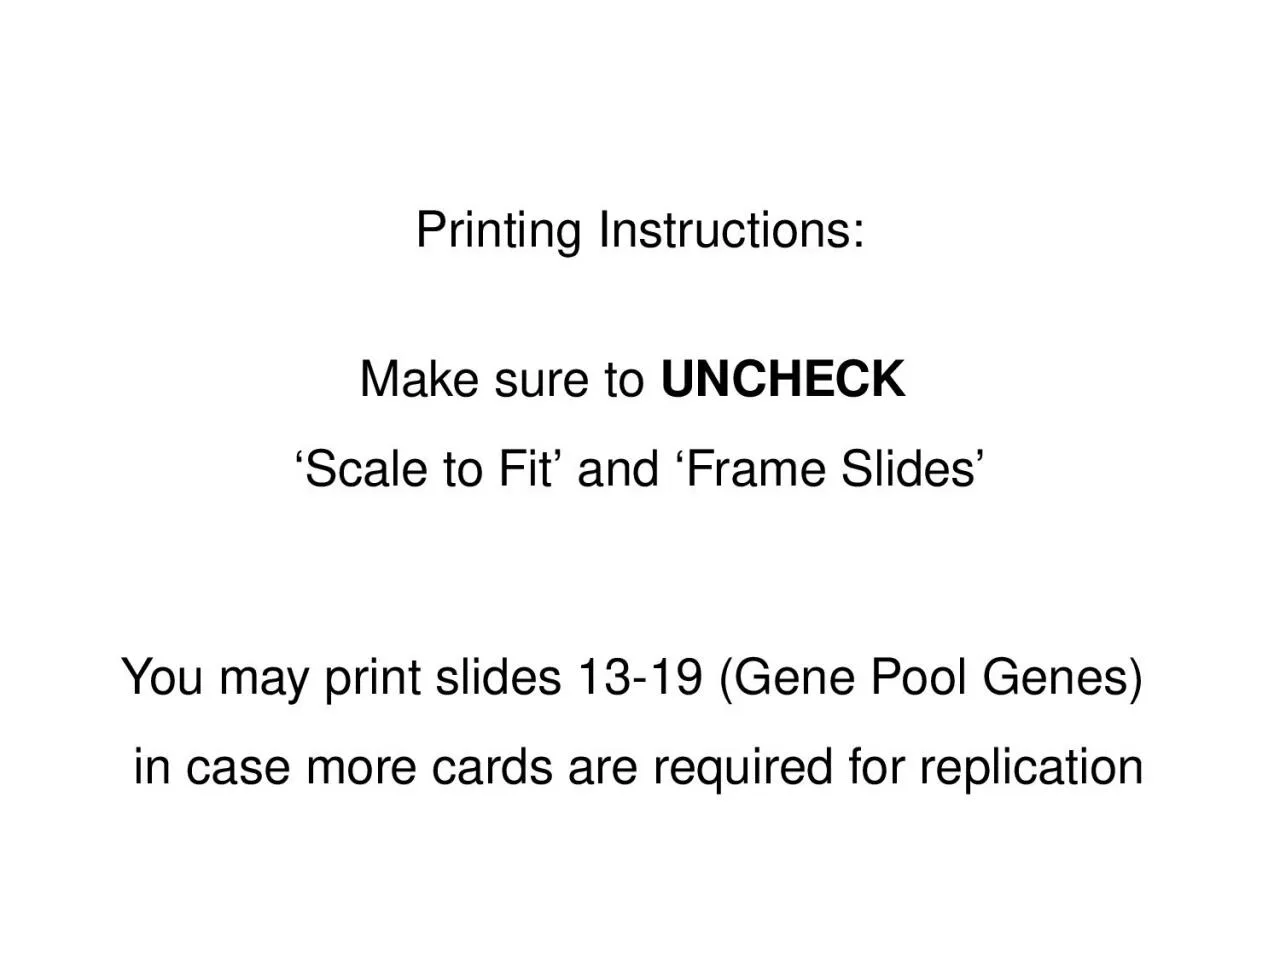 Printing Instructions: Make sure to